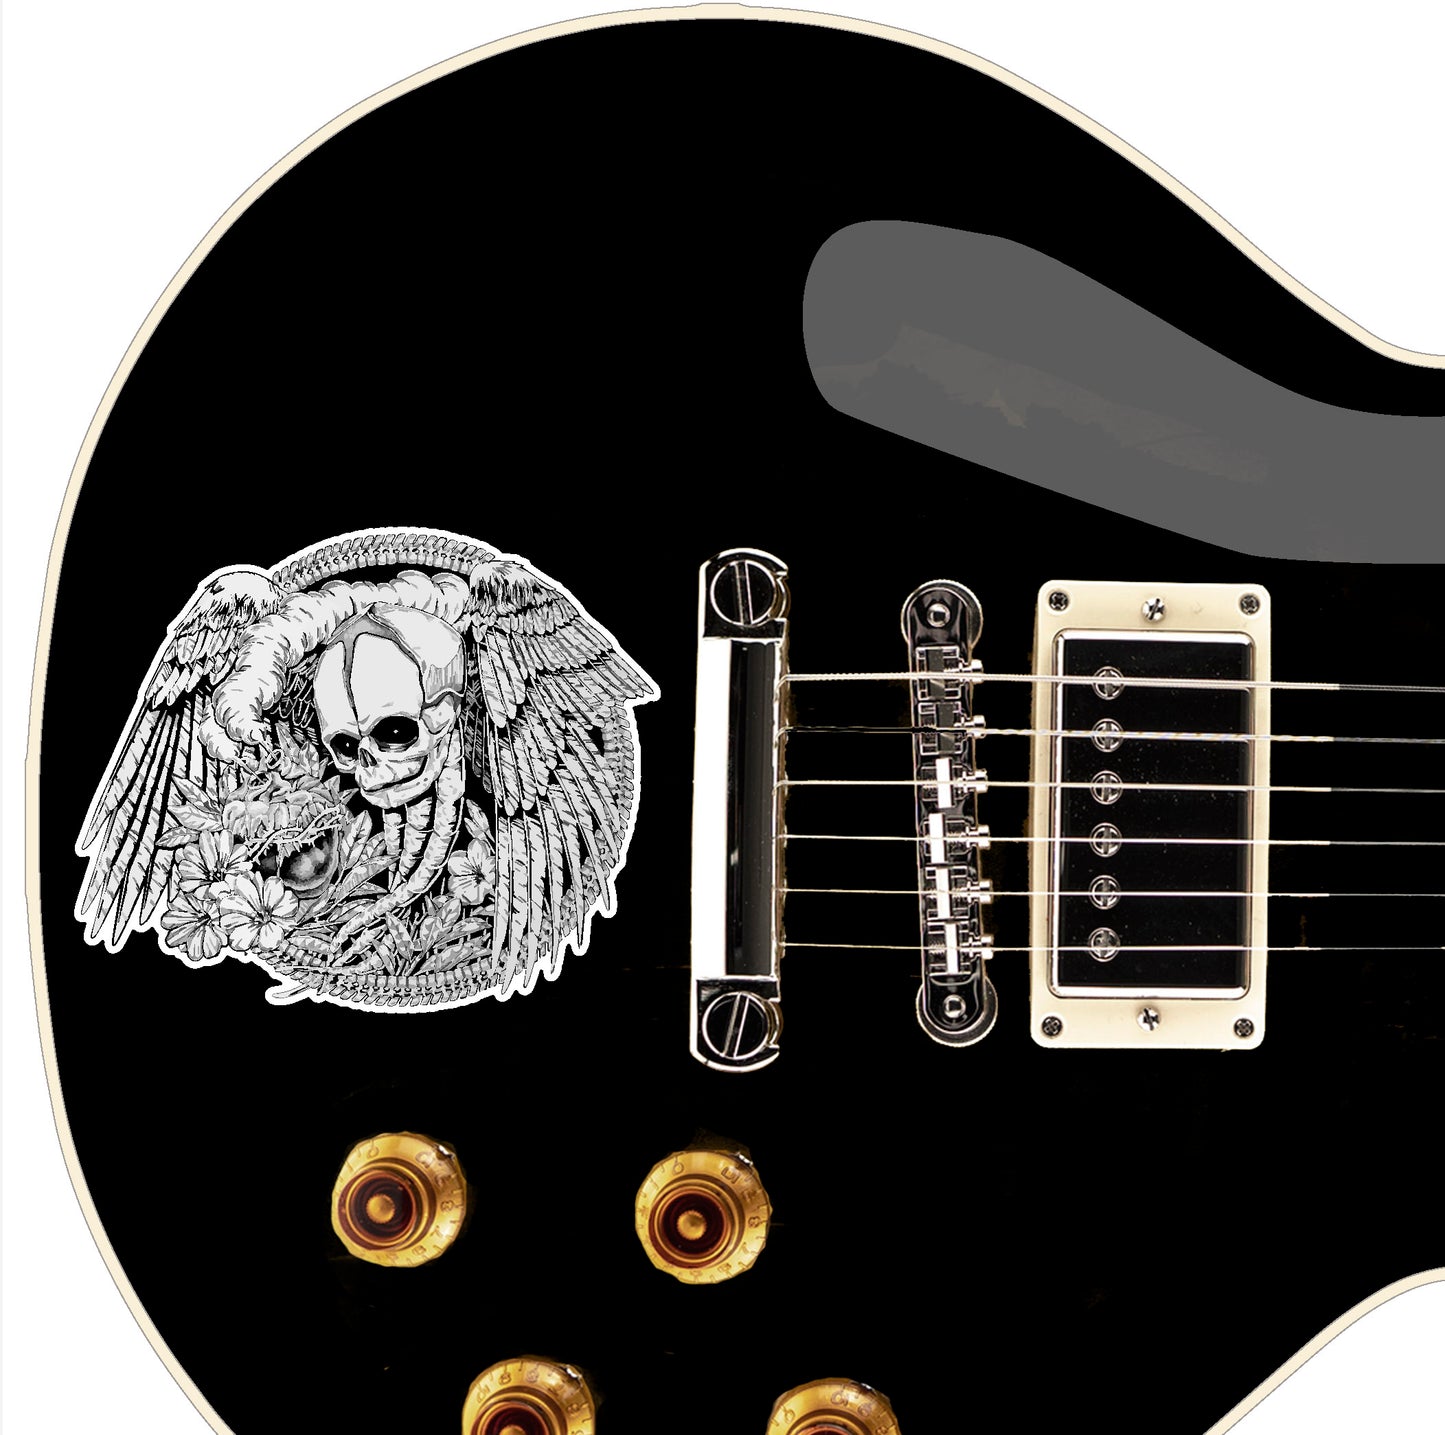 The Death Skulls 4 pack Decal Stickers. For Guitars & Basses. Also suitable for Gaming Consoles, Laptops, Walls or any flat smooth surface.